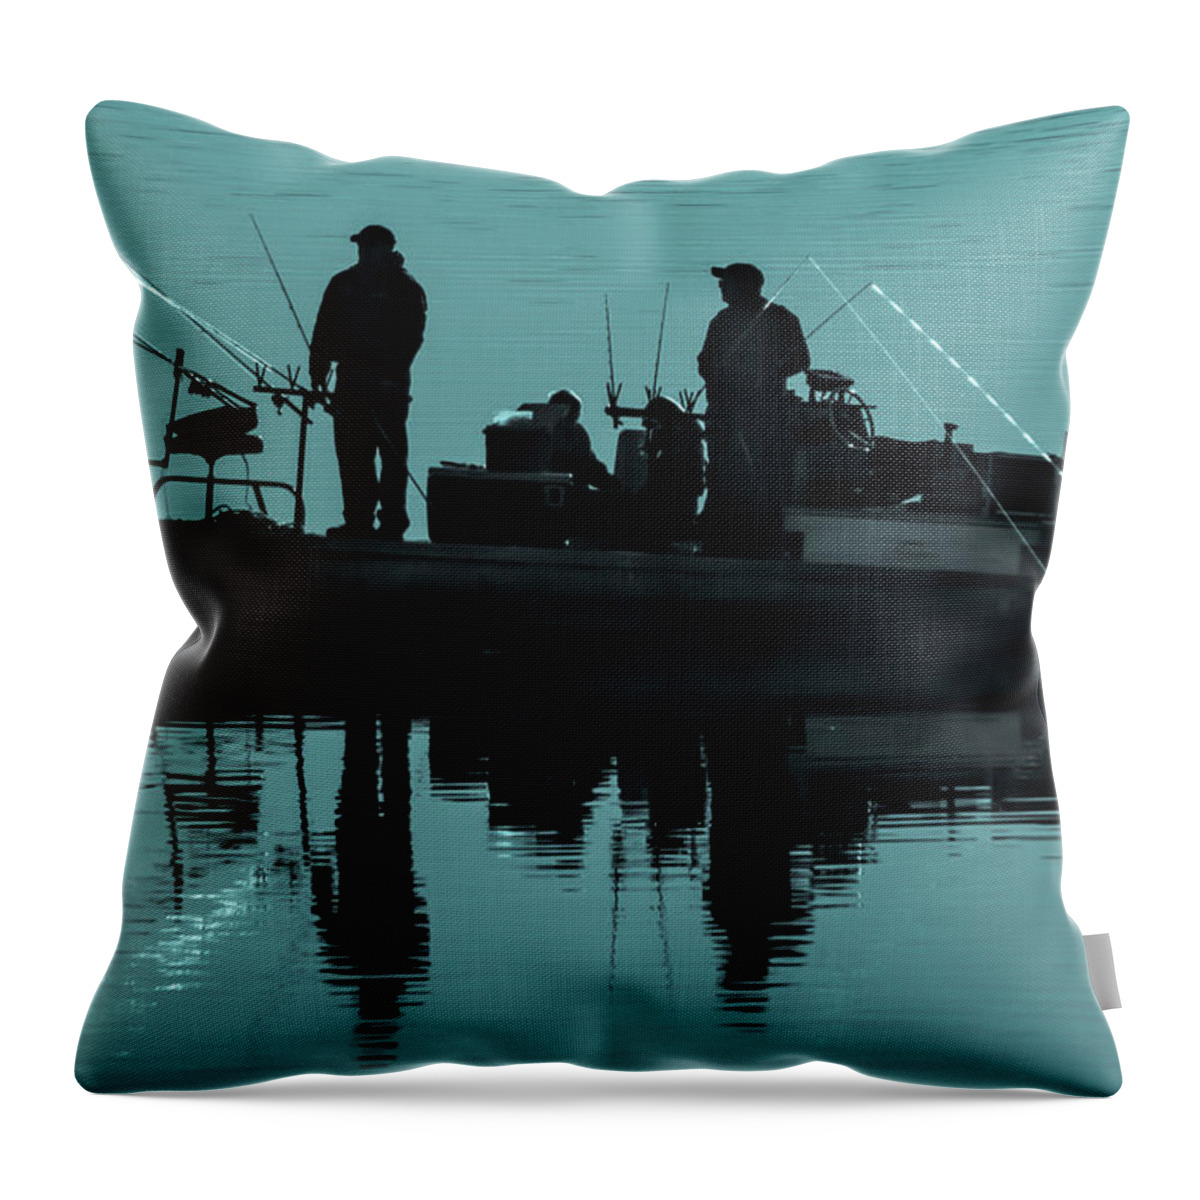 Photograph Throw Pillow featuring the photograph Early Morning Fishing by David Wagenblatt